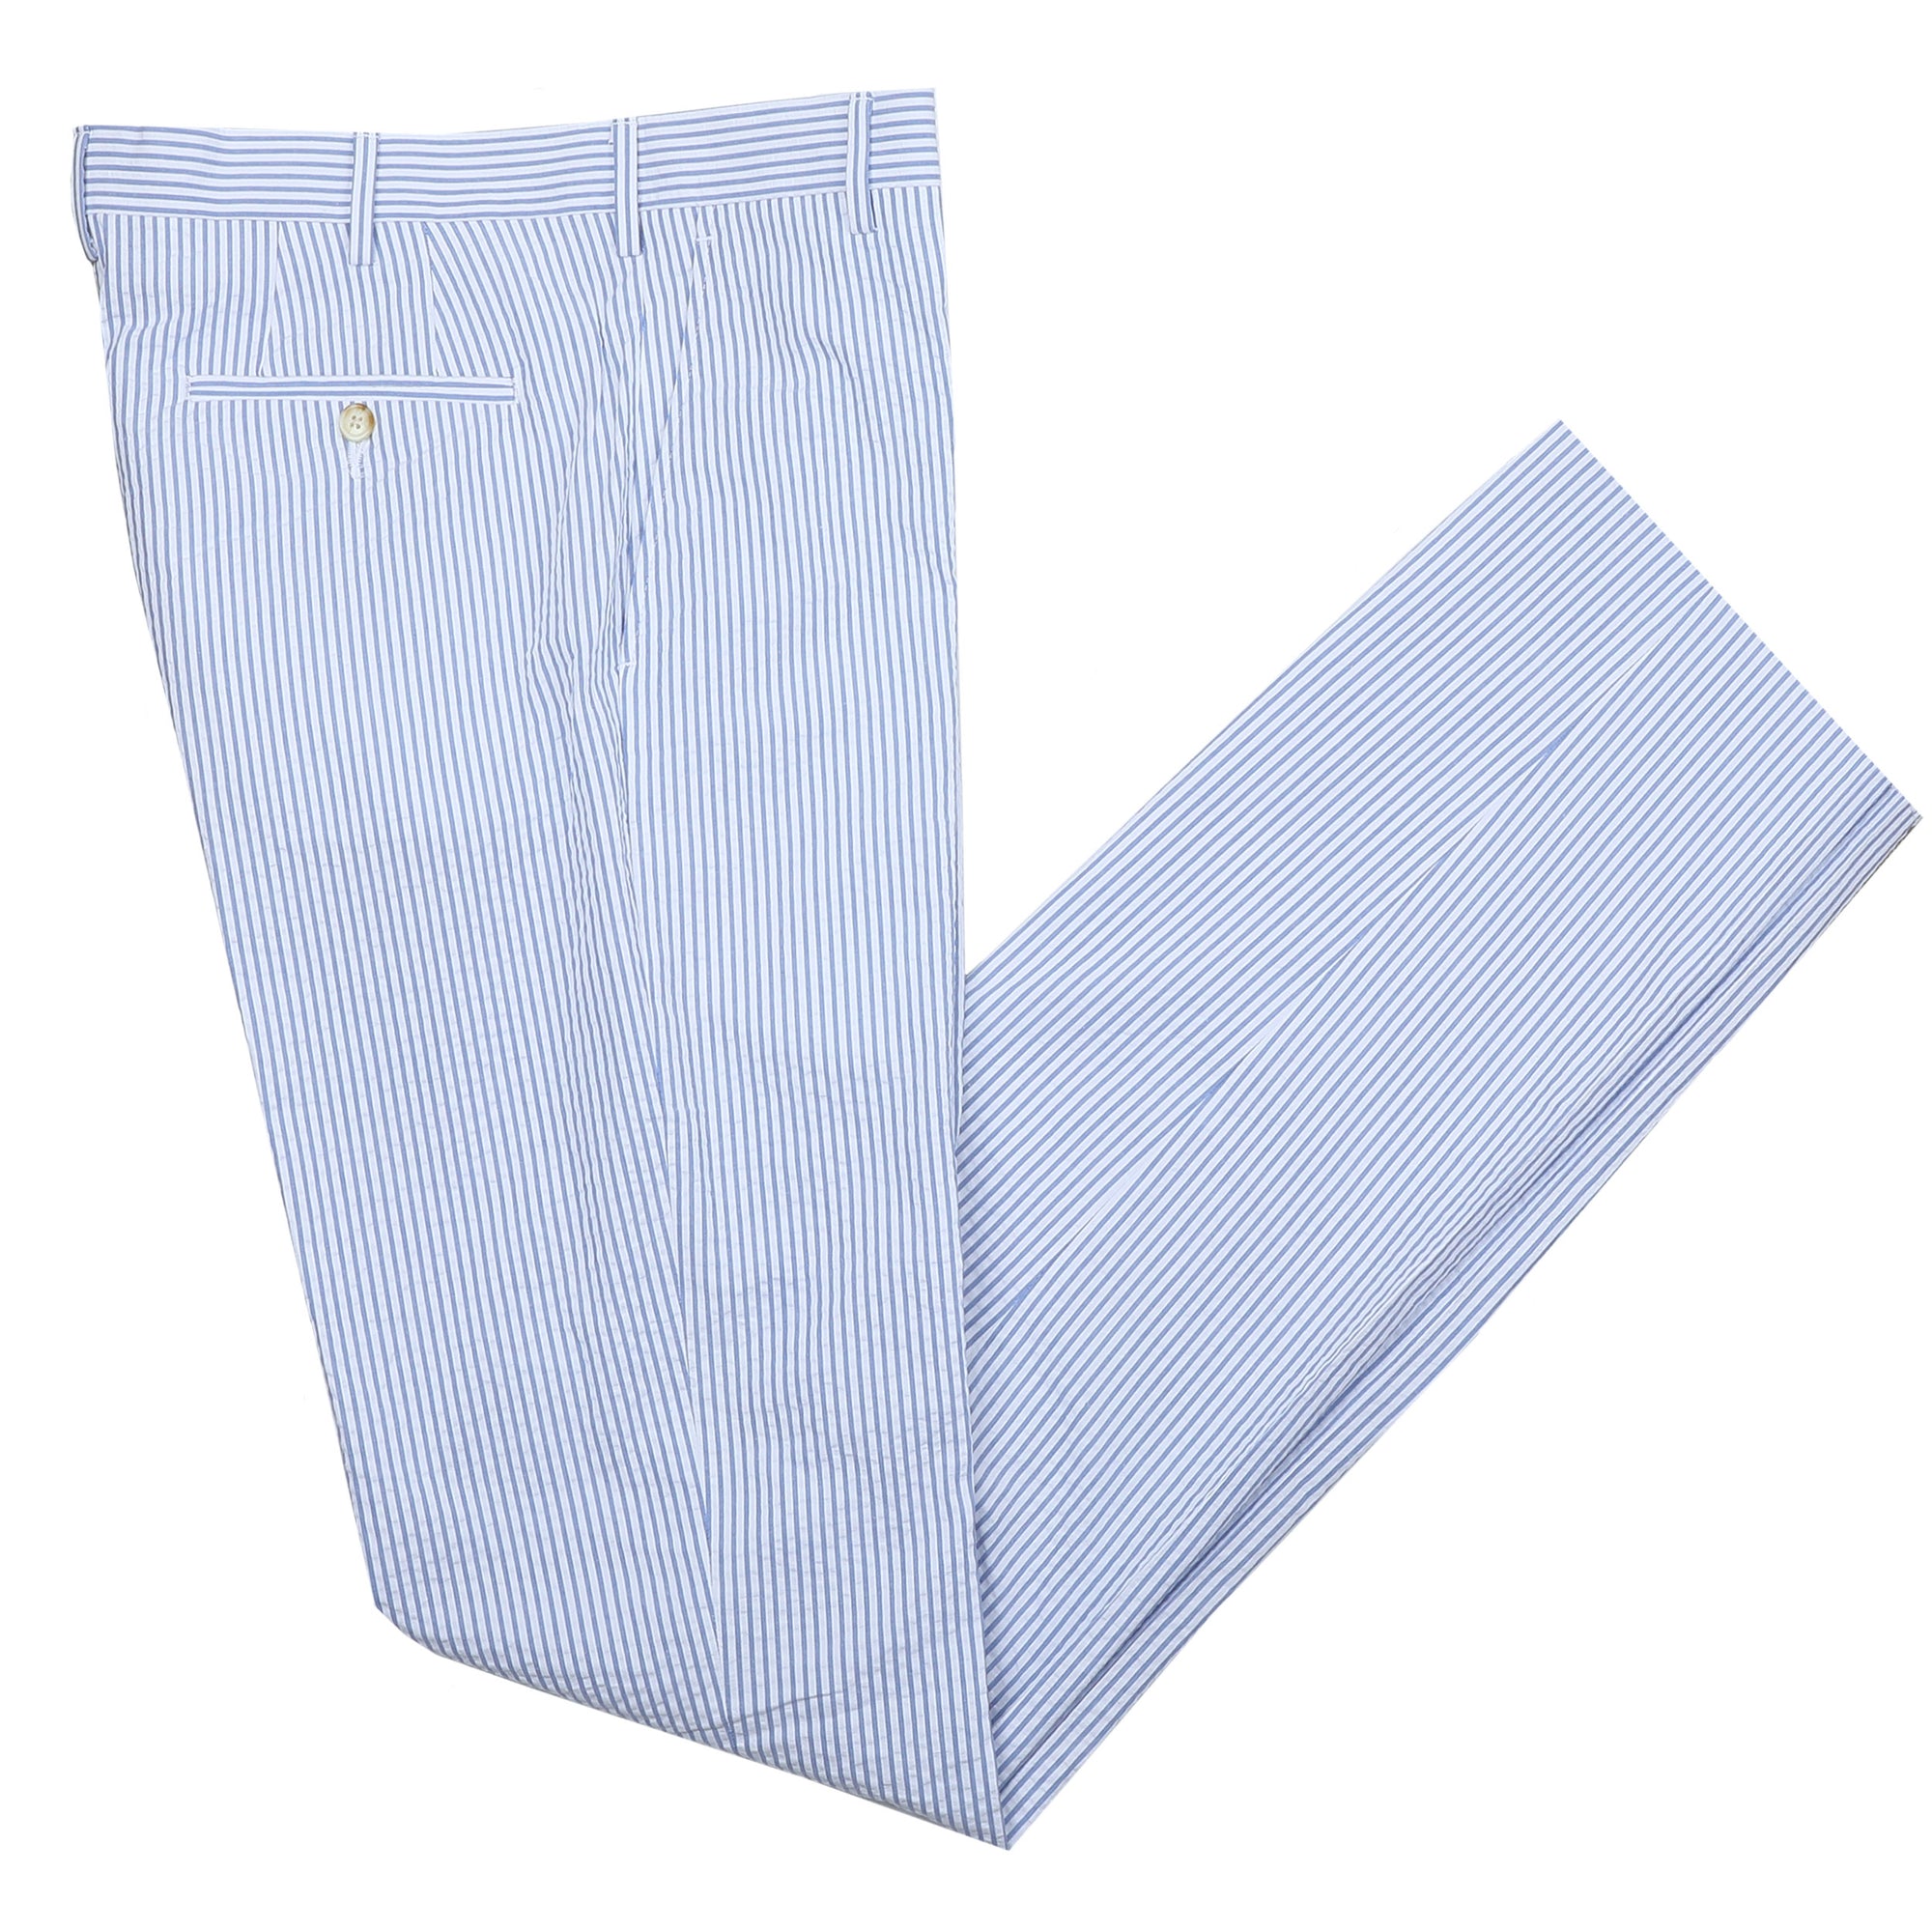 Experience the breezy, classic charm of our Algiers Lt. Blue / White Seersucker Pant. These stunning New Orleans-inspired trousers are perfect for your next summer outing. Cut from lightweight seersucker fabric, they combine timeless Tan and White stripes with a relaxed fit for unbeatable comfort and style. Try them this season for a look that radiates effortless elegance!  100% Cotton Seersucker • Algiers Fit • Flat Front • Tab Button Closure • Unfinished Bottom (37.5") • Dry Clean • Imported